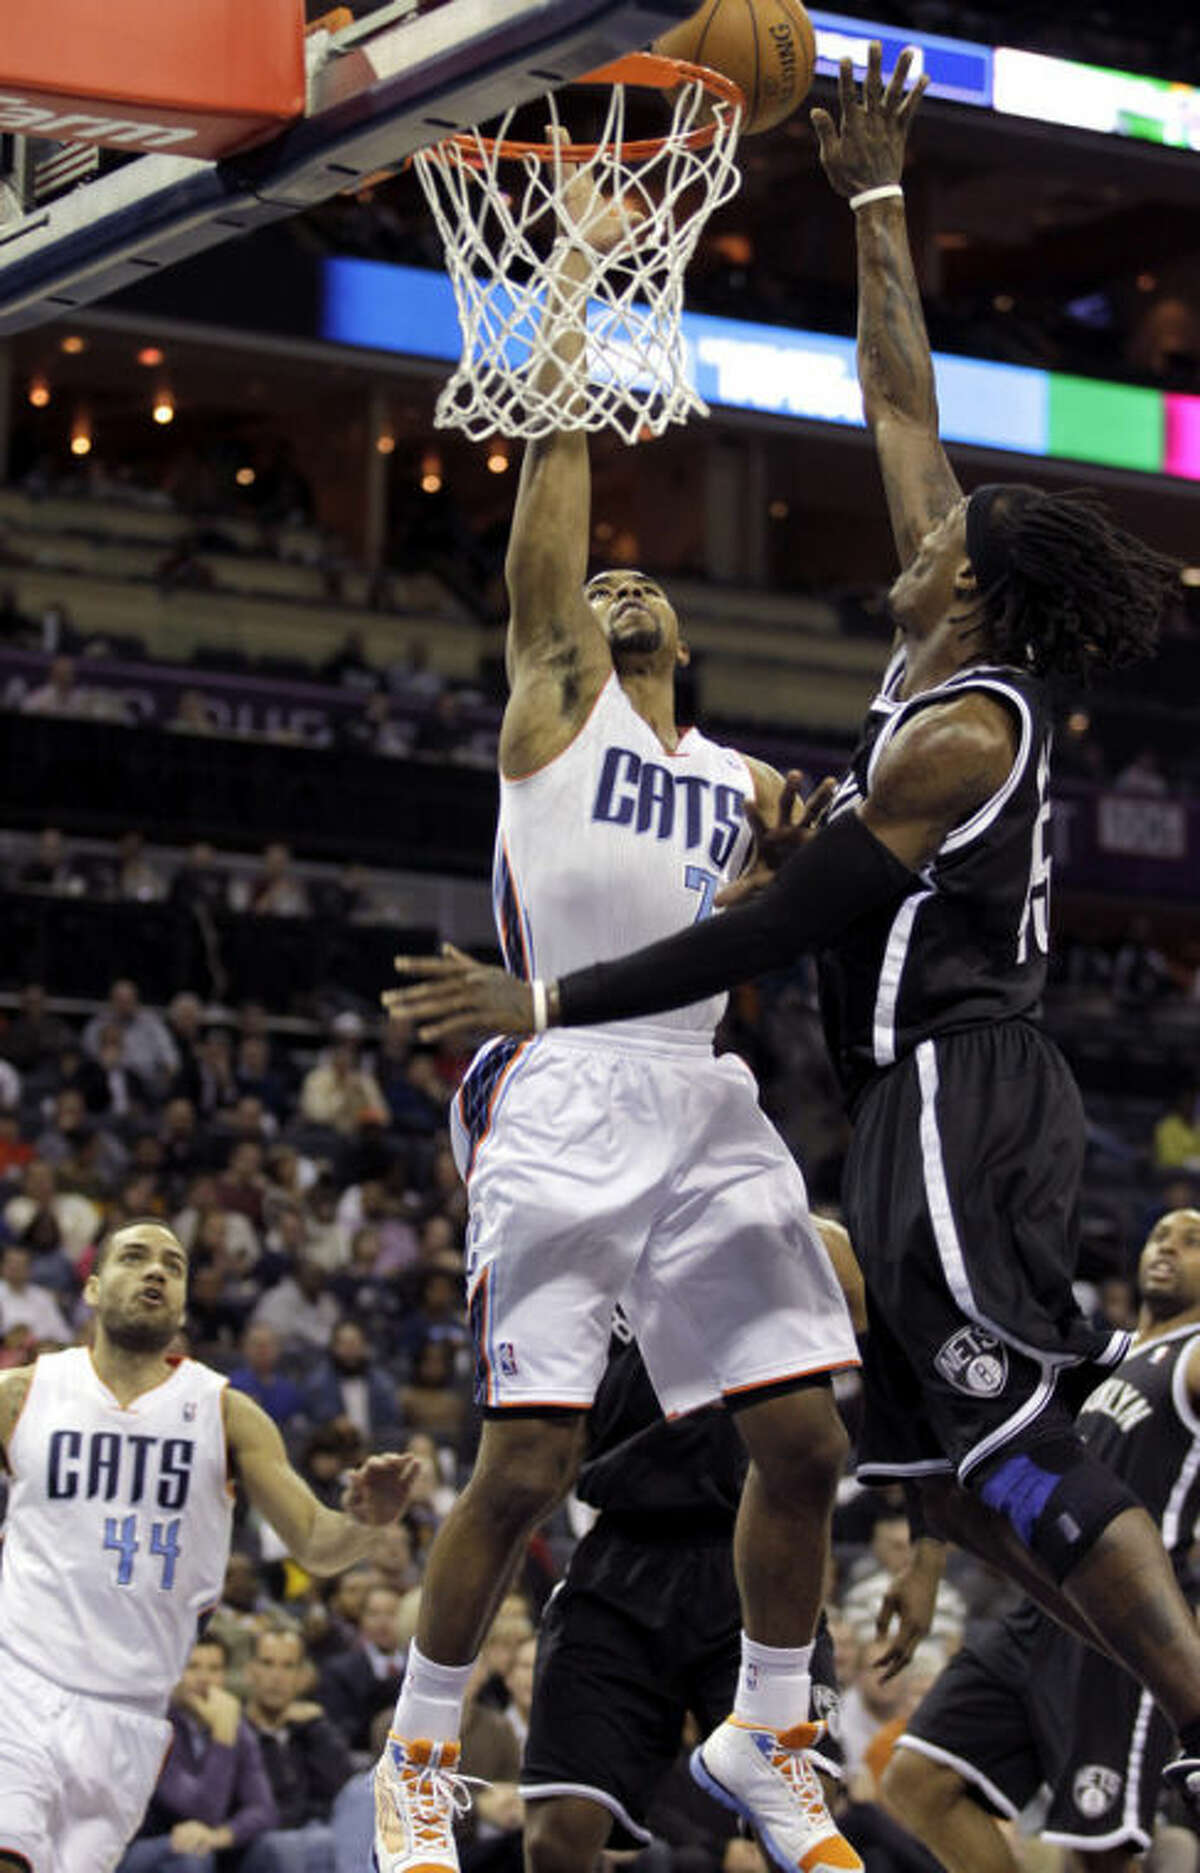 Charlotte Bobcats' Ramon Sessions (7) has his shot blocked by Brooklyn Nets' Gerald Wallace (45) during the first half of an NBA basketball game in Charlotte, N.C., Wednesday, March 6, 2013. (AP Photo/Bob Leverone)